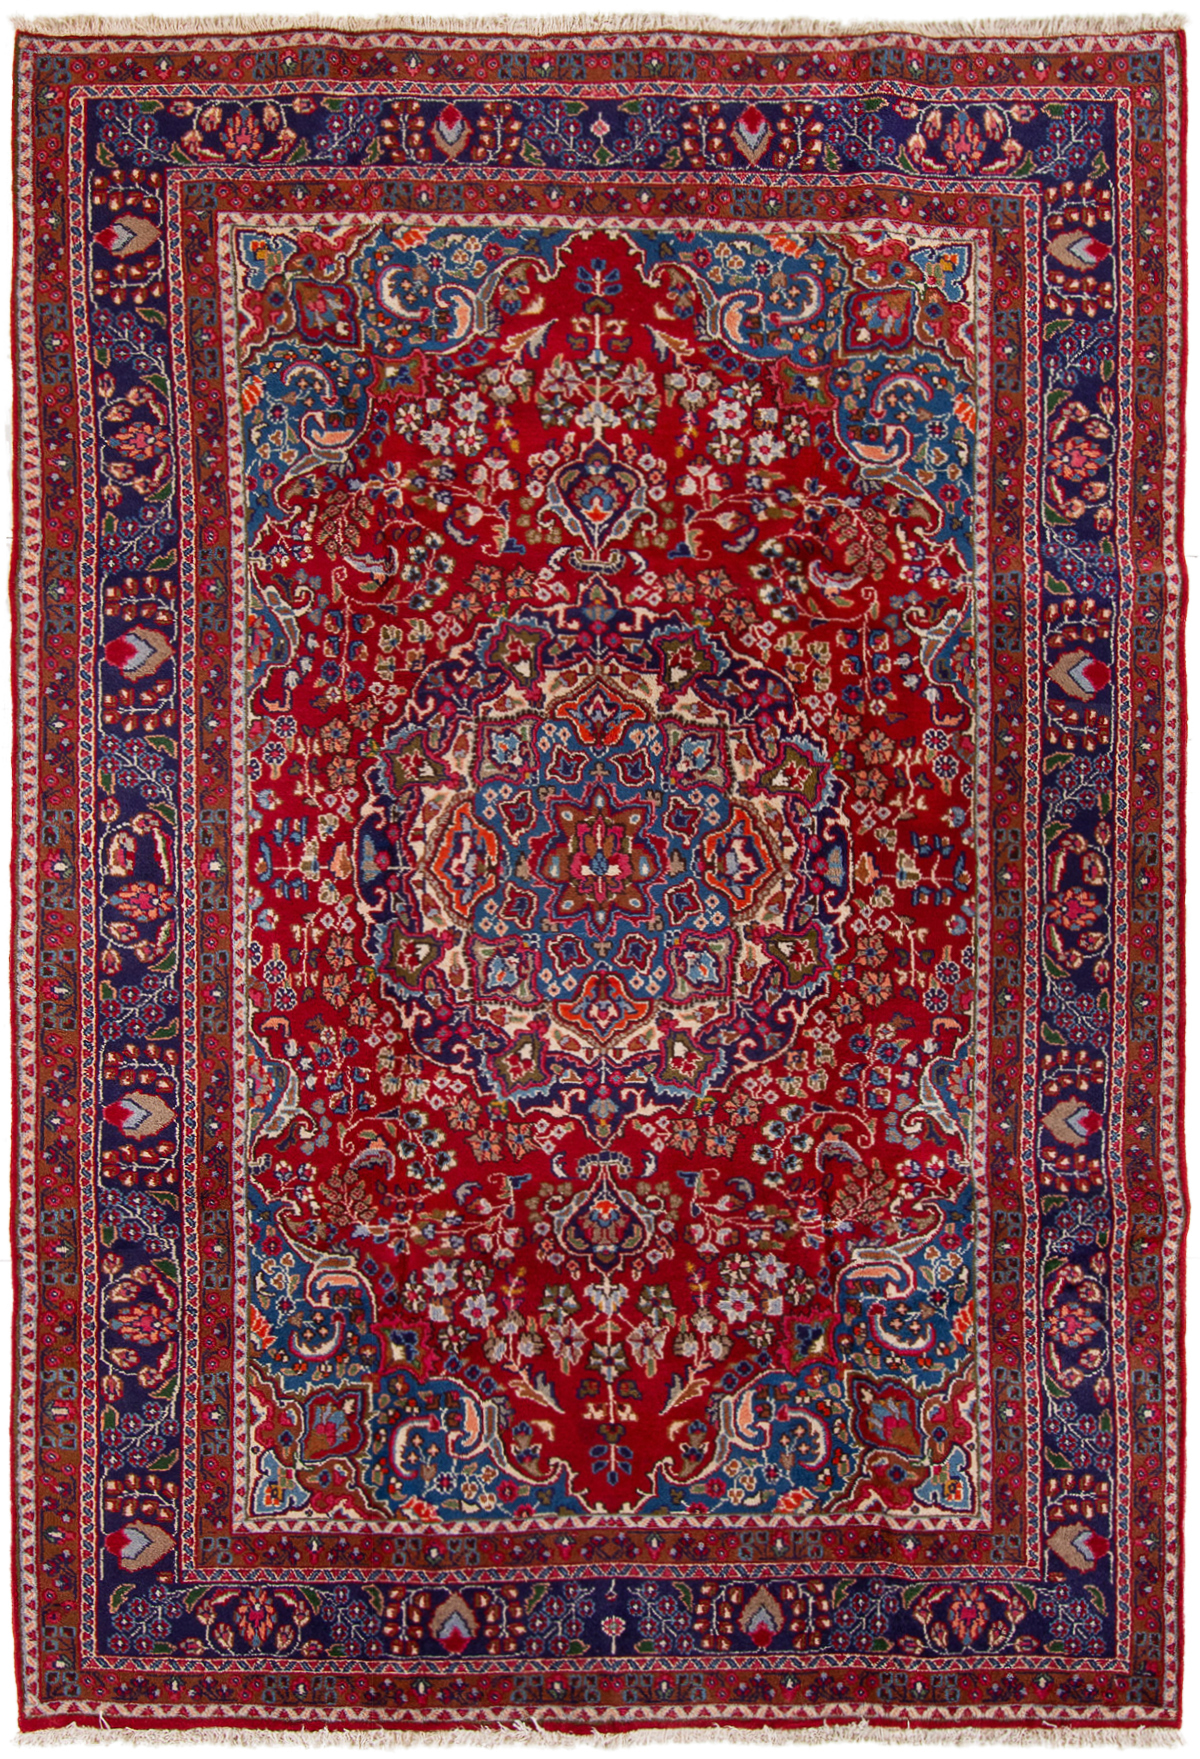 Hand-knotted Sabzevar  Wool Rug 6'6" x 9'7" Size: 6'6" x 9'7"  